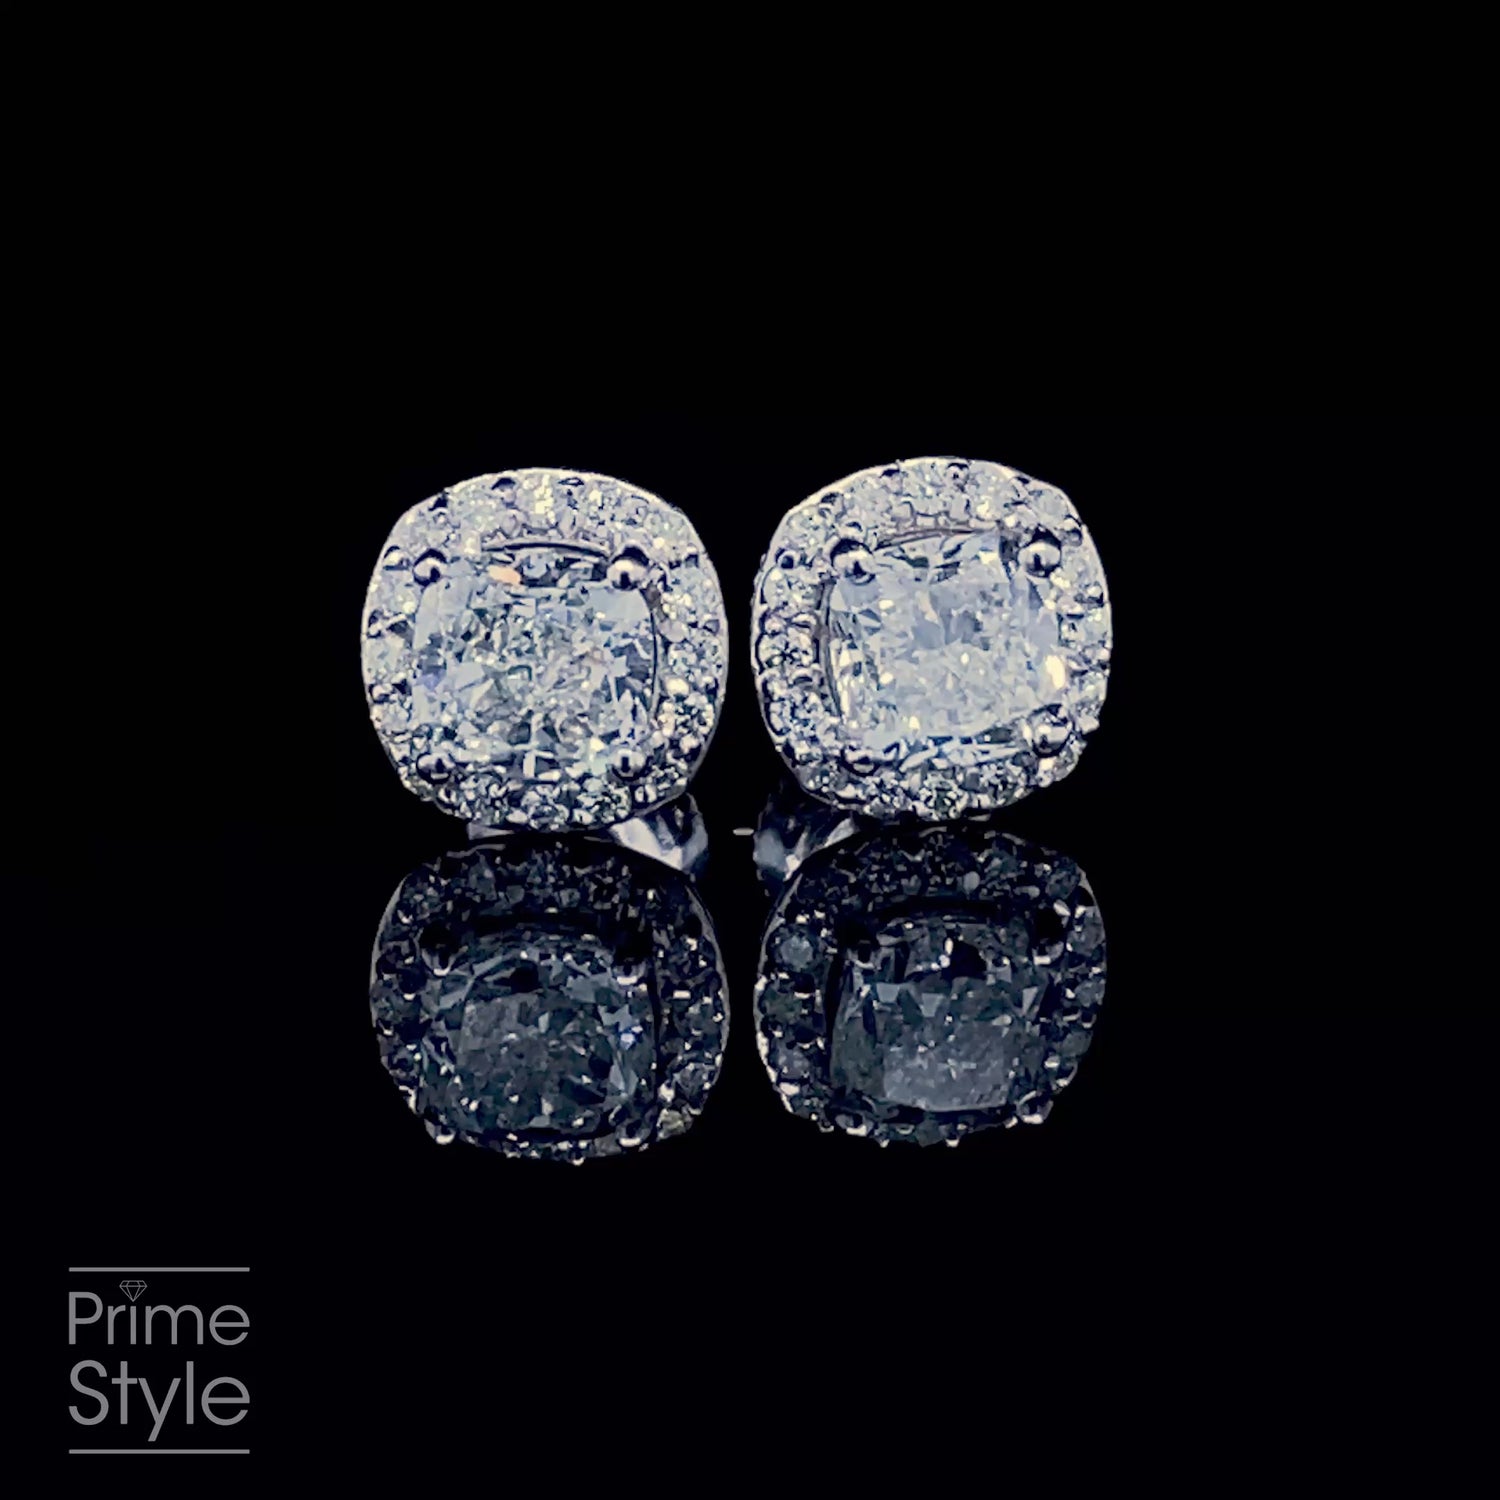 Exquisite 2.10CT Round and Cushion Cut Diamond Stud Earrings in Platinum